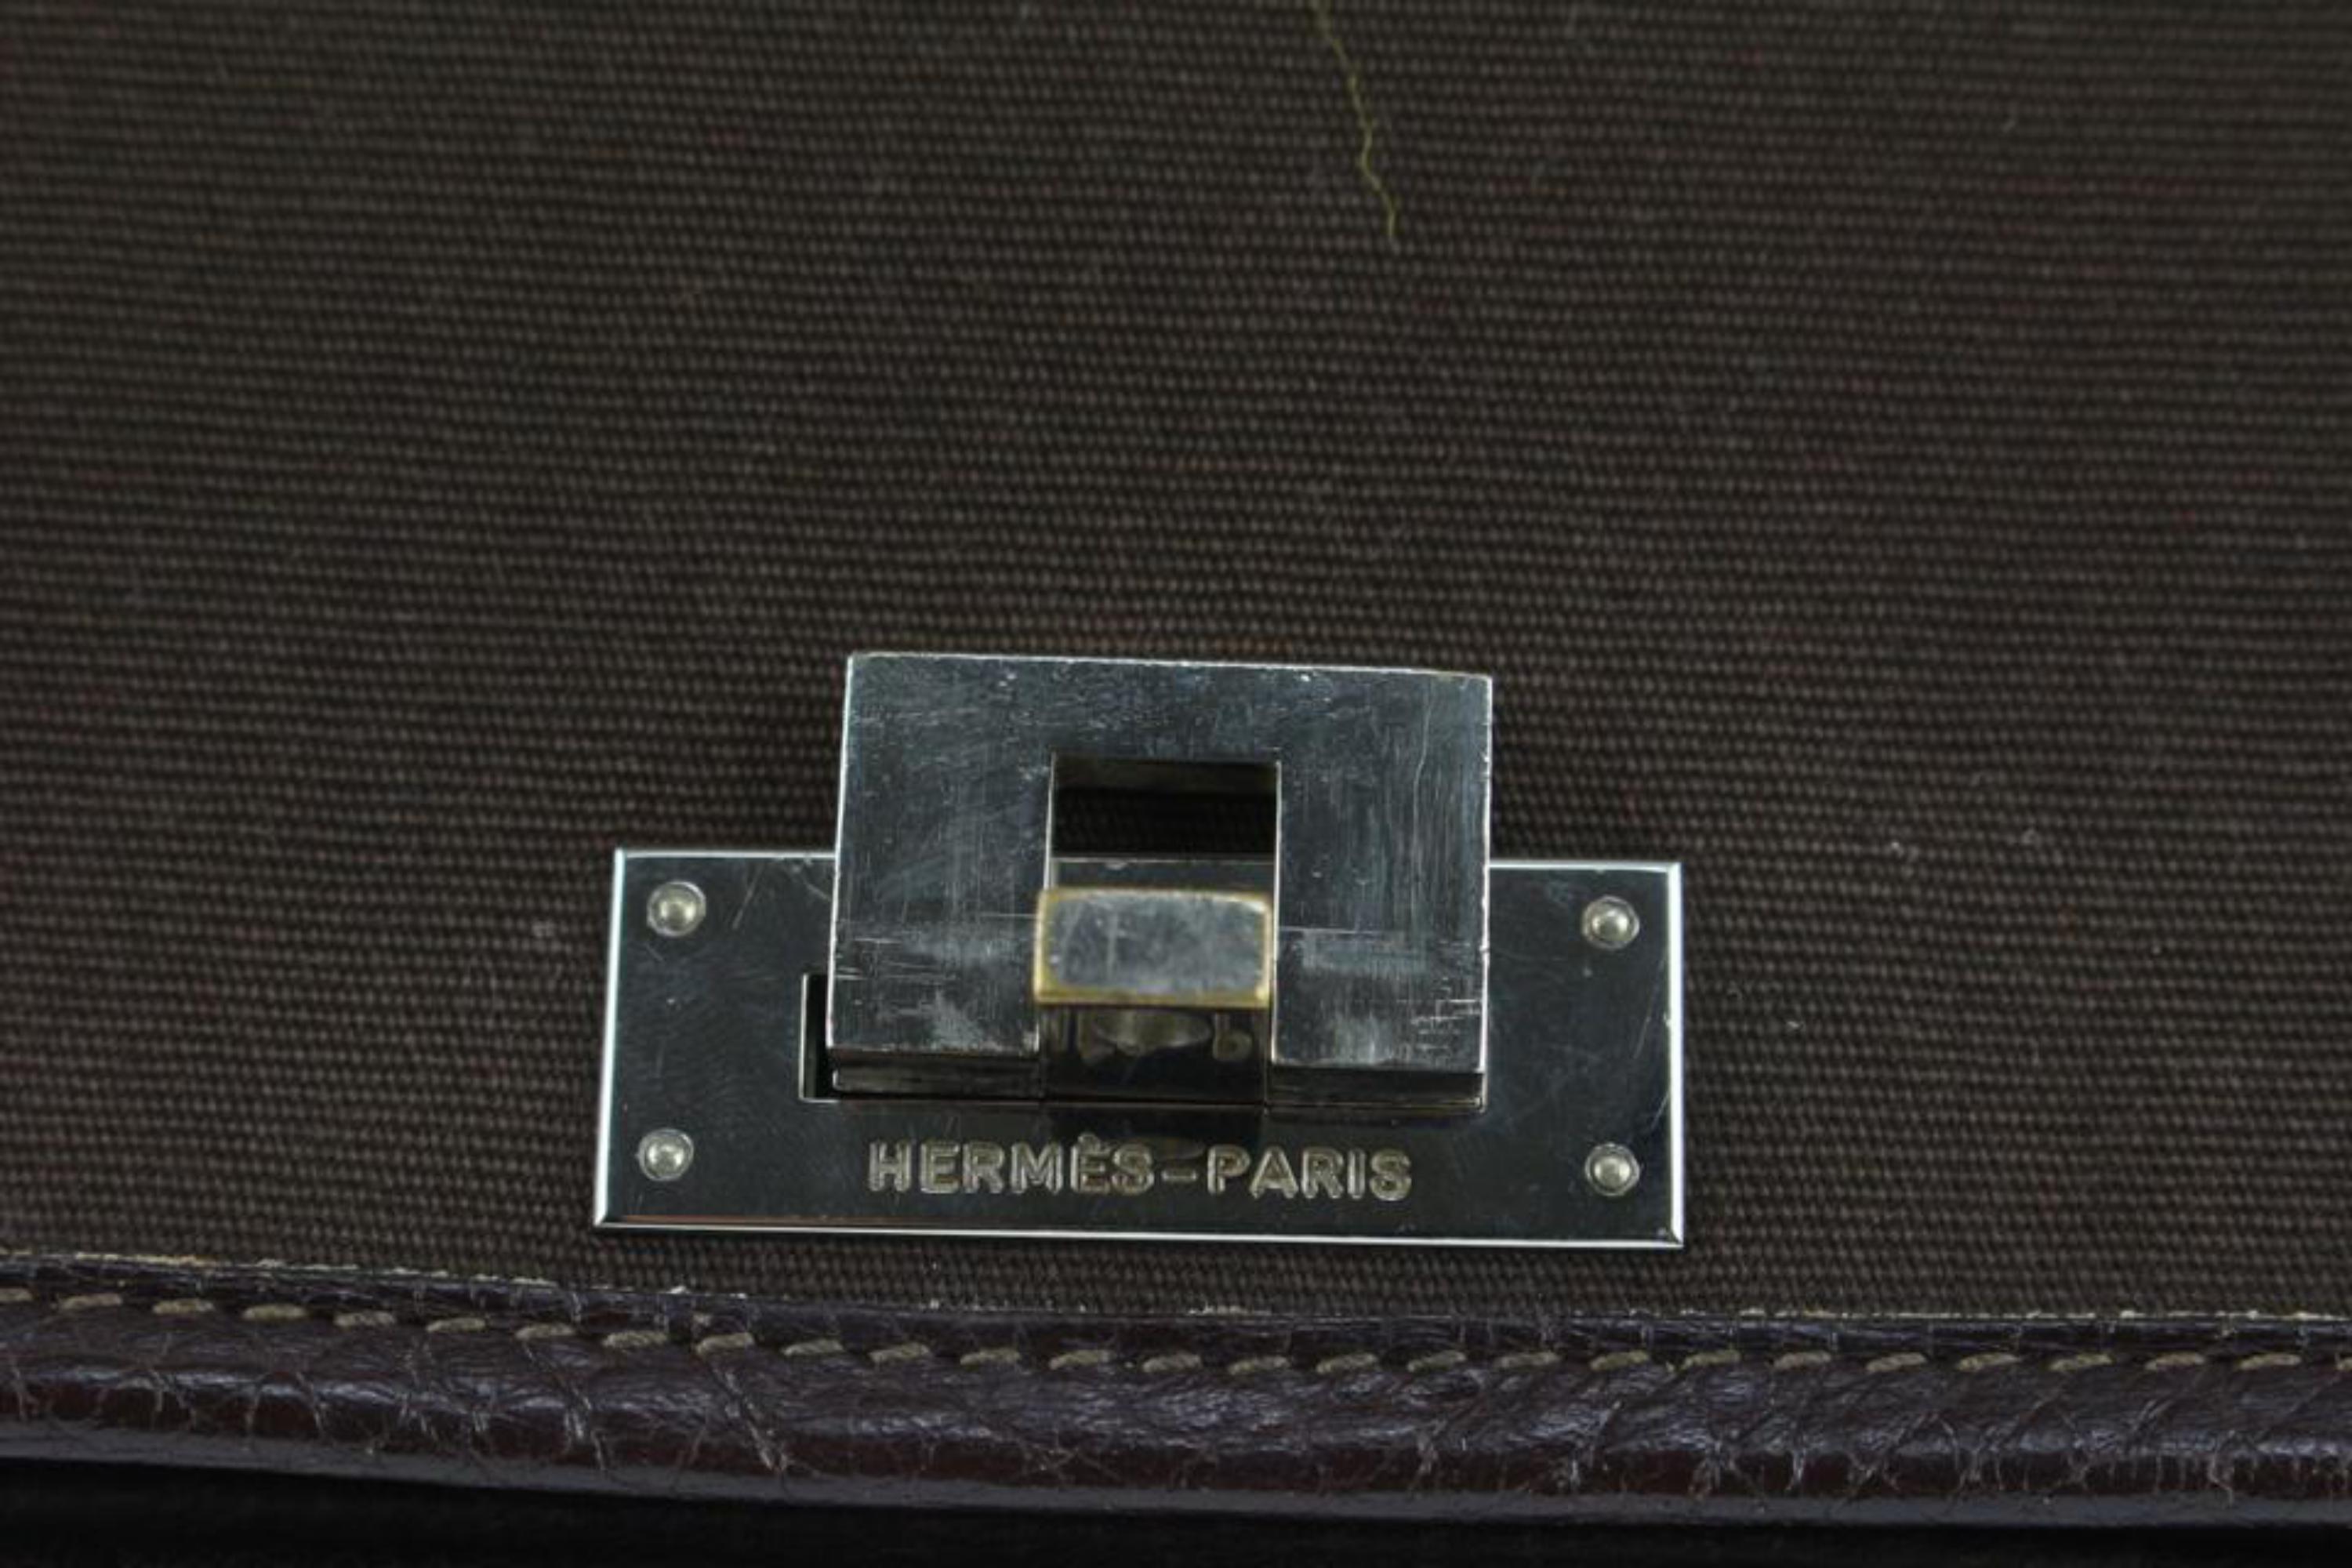 Date Code/Serial Number: H in a Square
Made In: France
Measurements: Length:  14